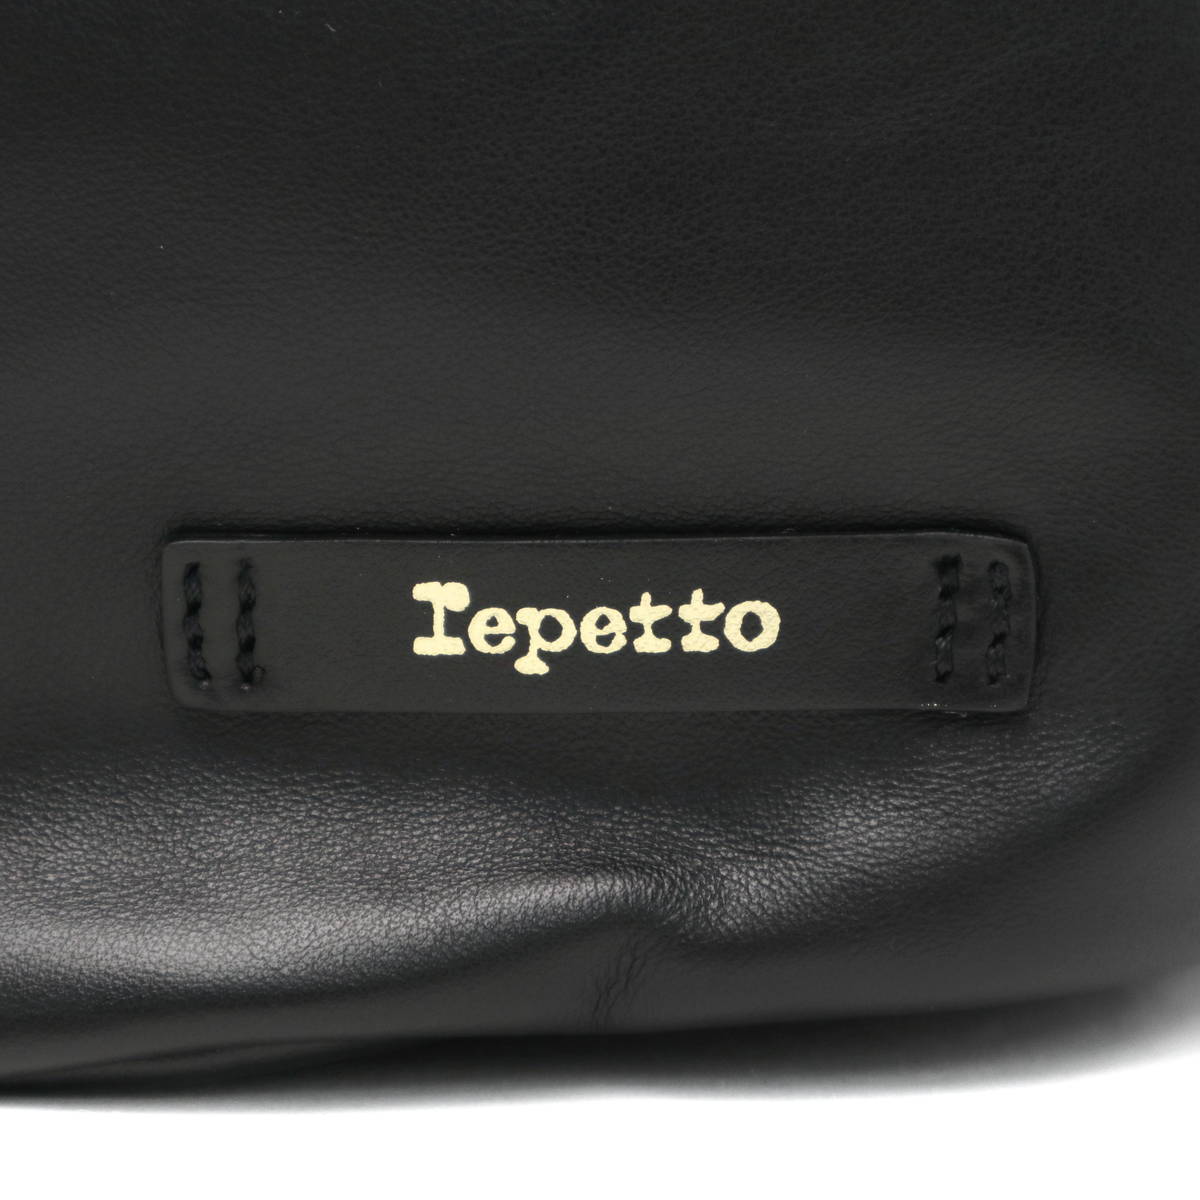 Repetto レペット Nouvel air 2WAYショルダーバッグ 51202450702